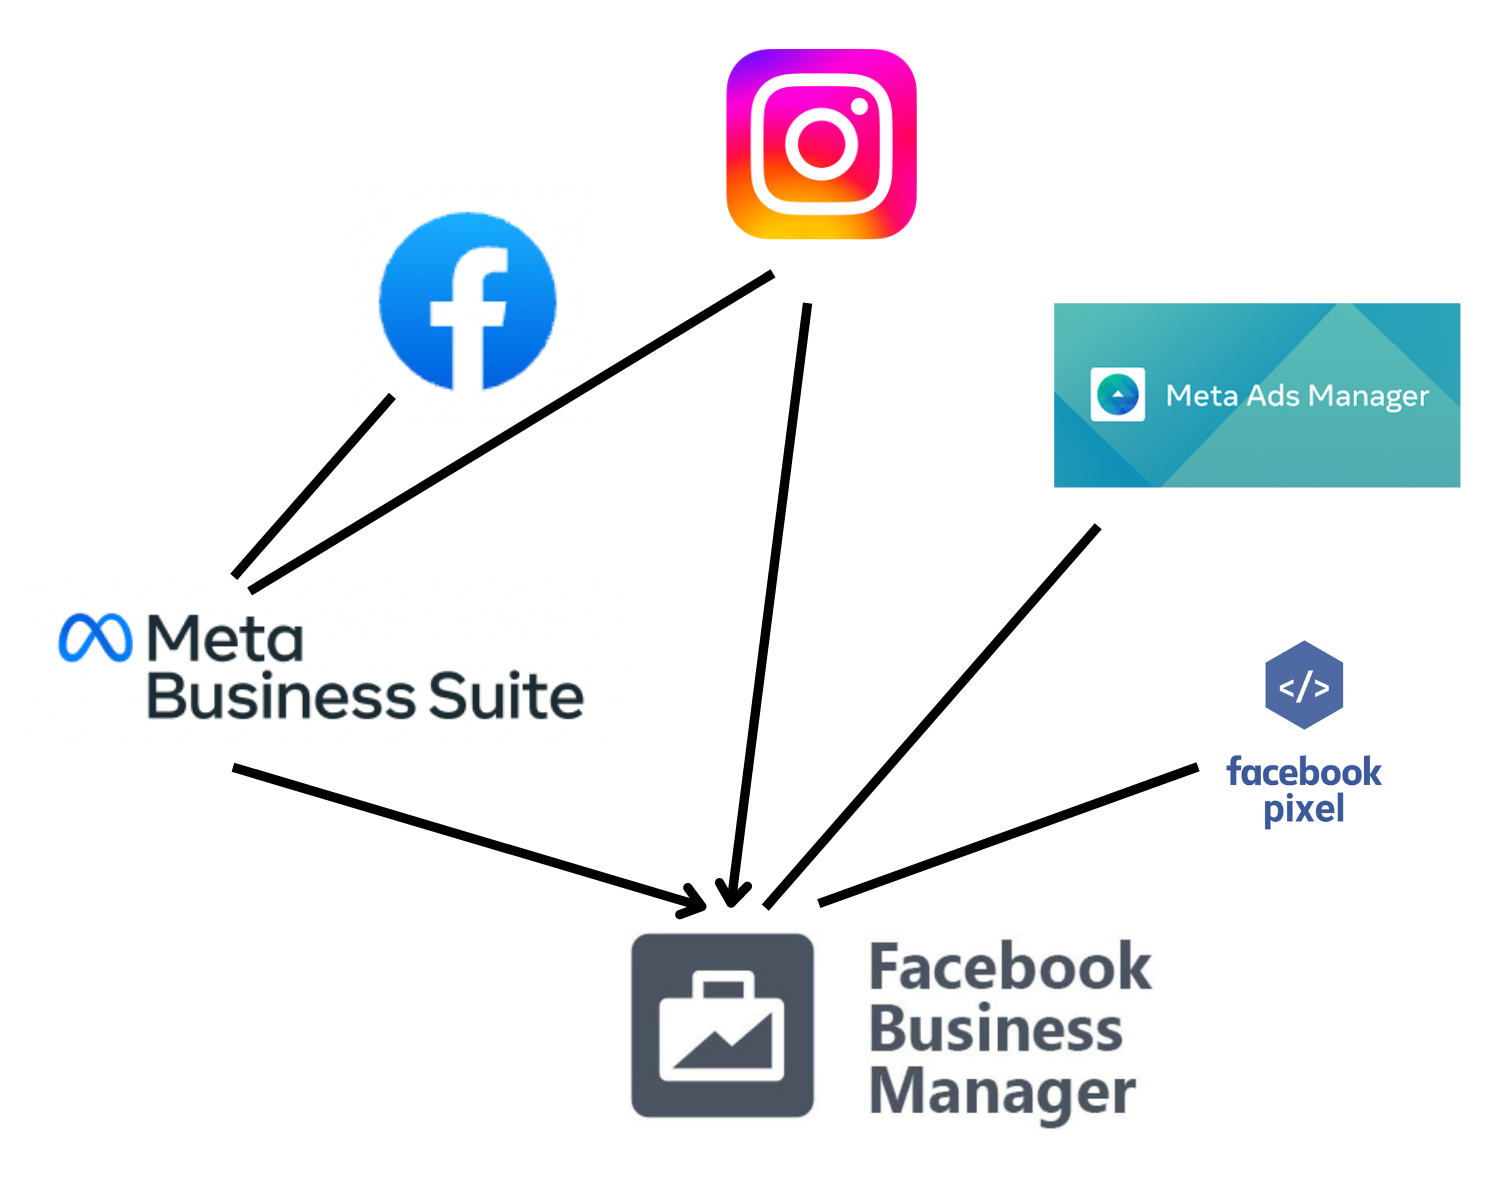 Meta Business Suite: How to Use